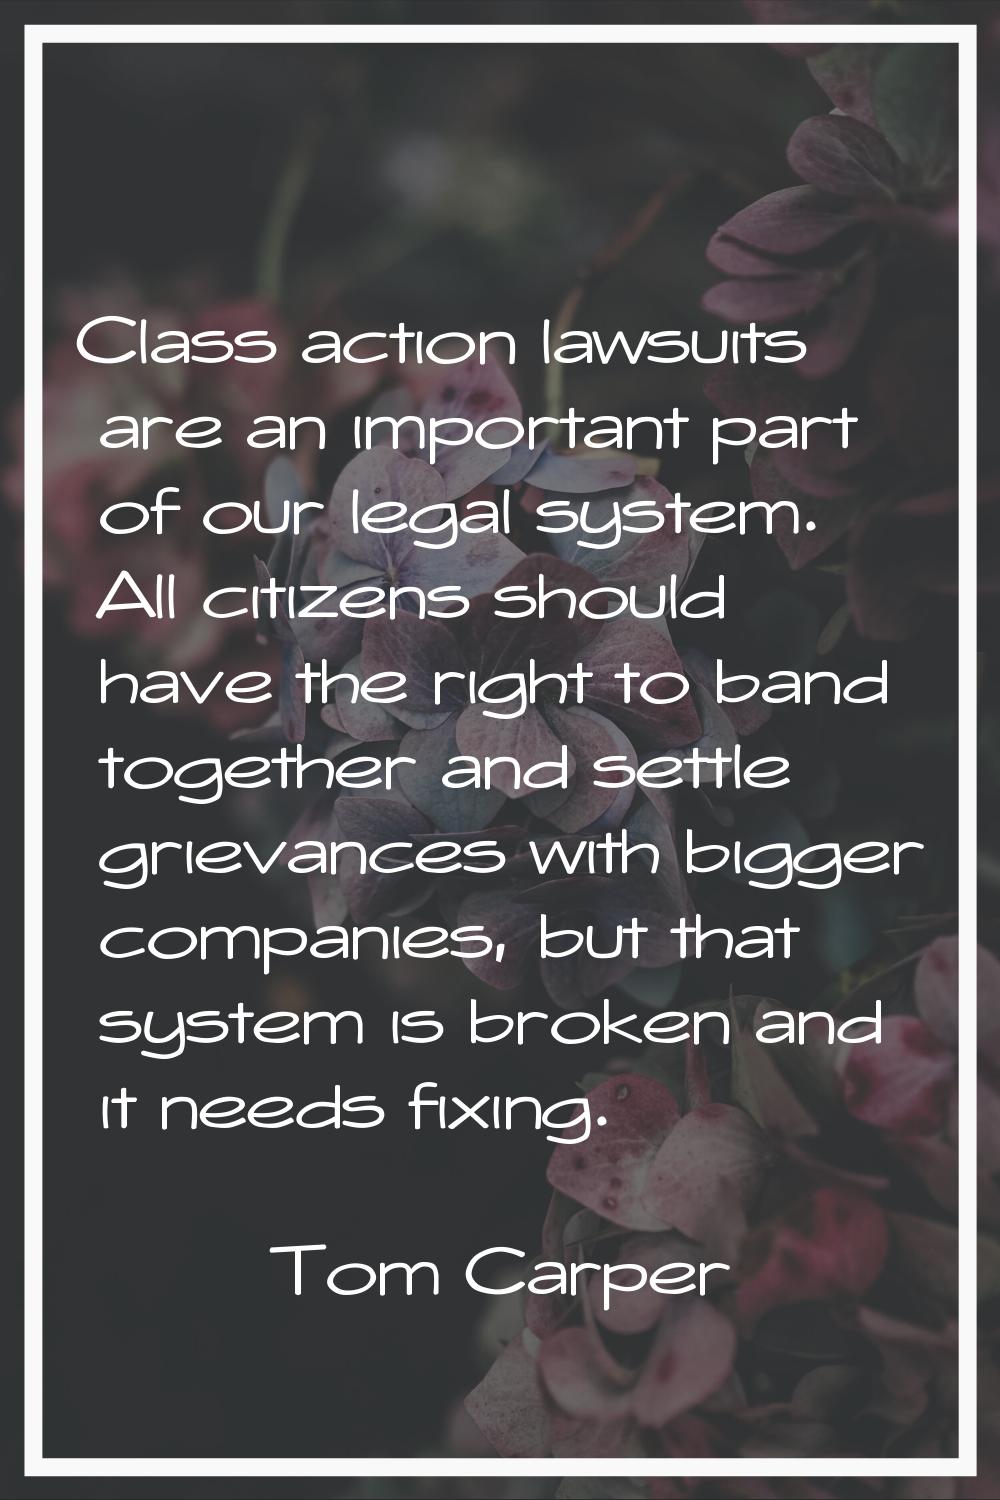 Class action lawsuits are an important part of our legal system. All citizens should have the right